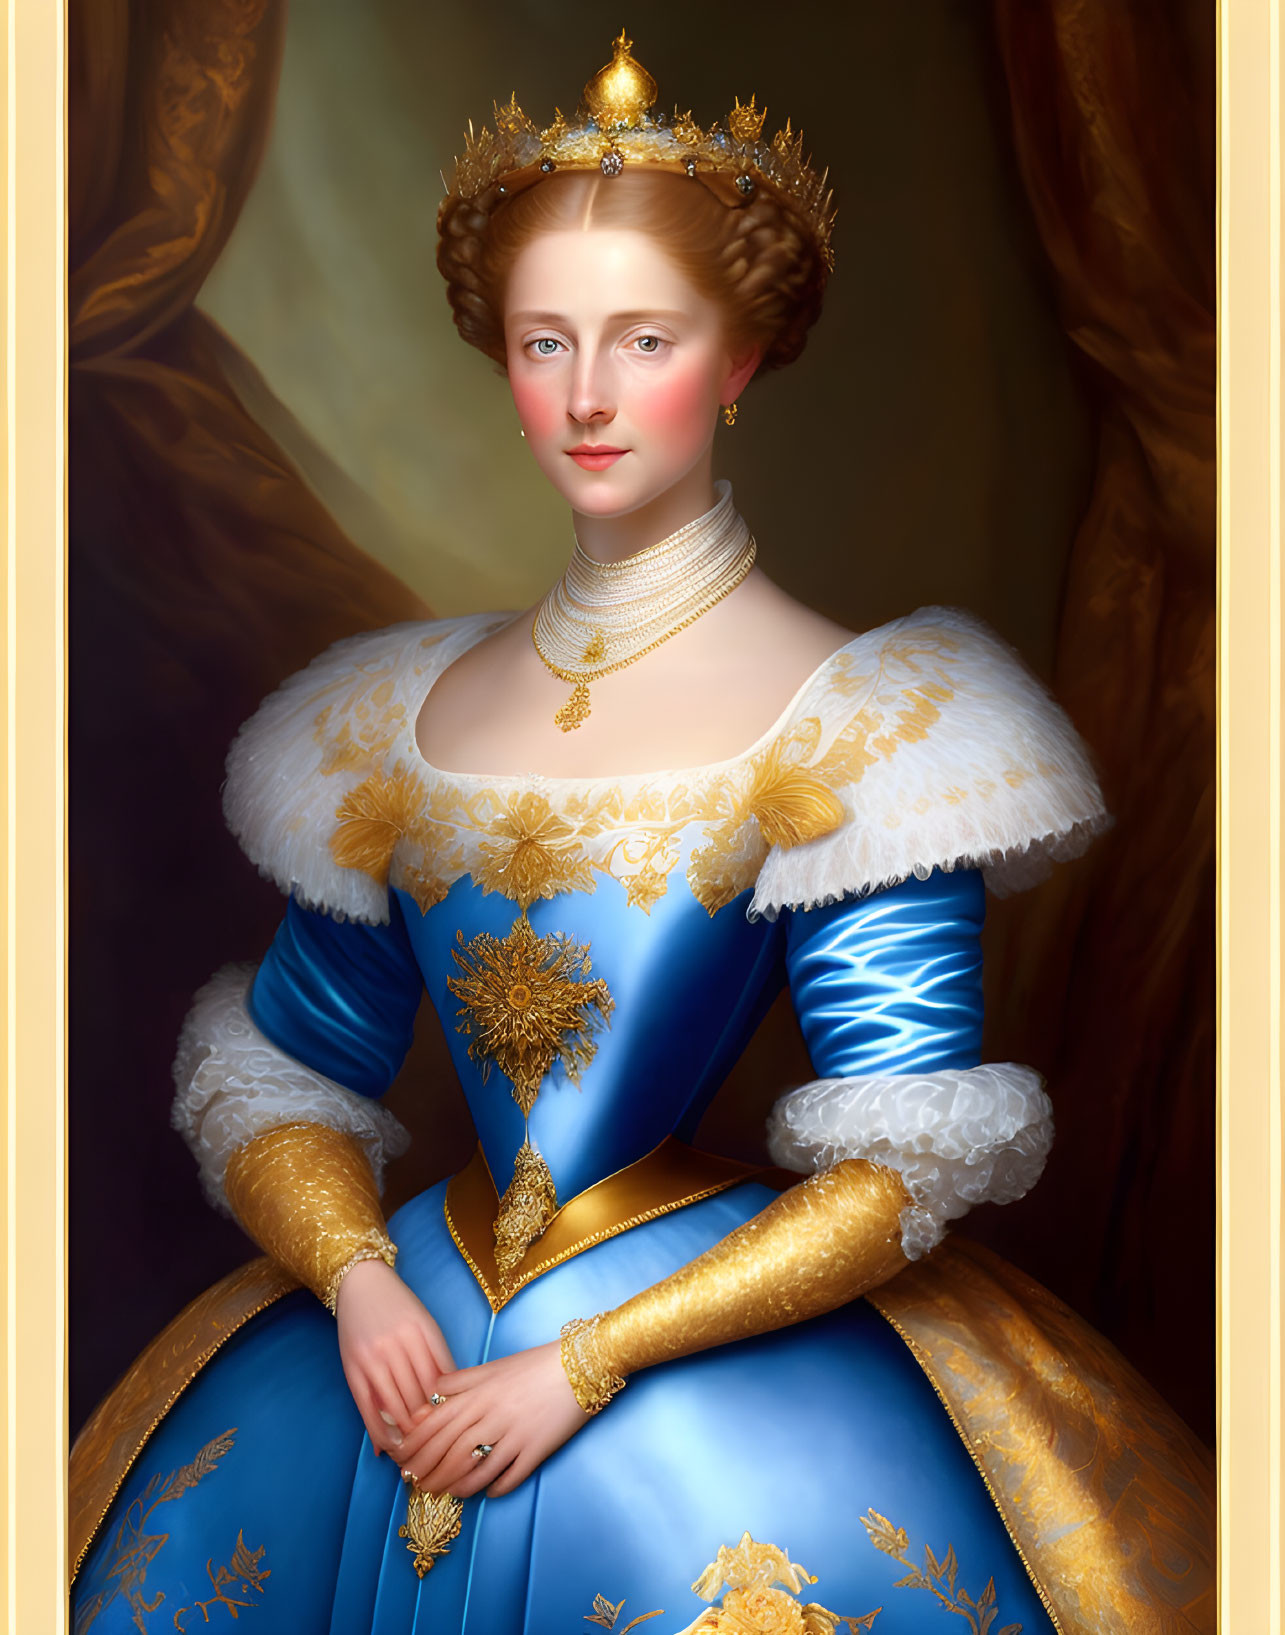 Woman in Royal Blue Dress with Gold Embroidery and Crown Portrait